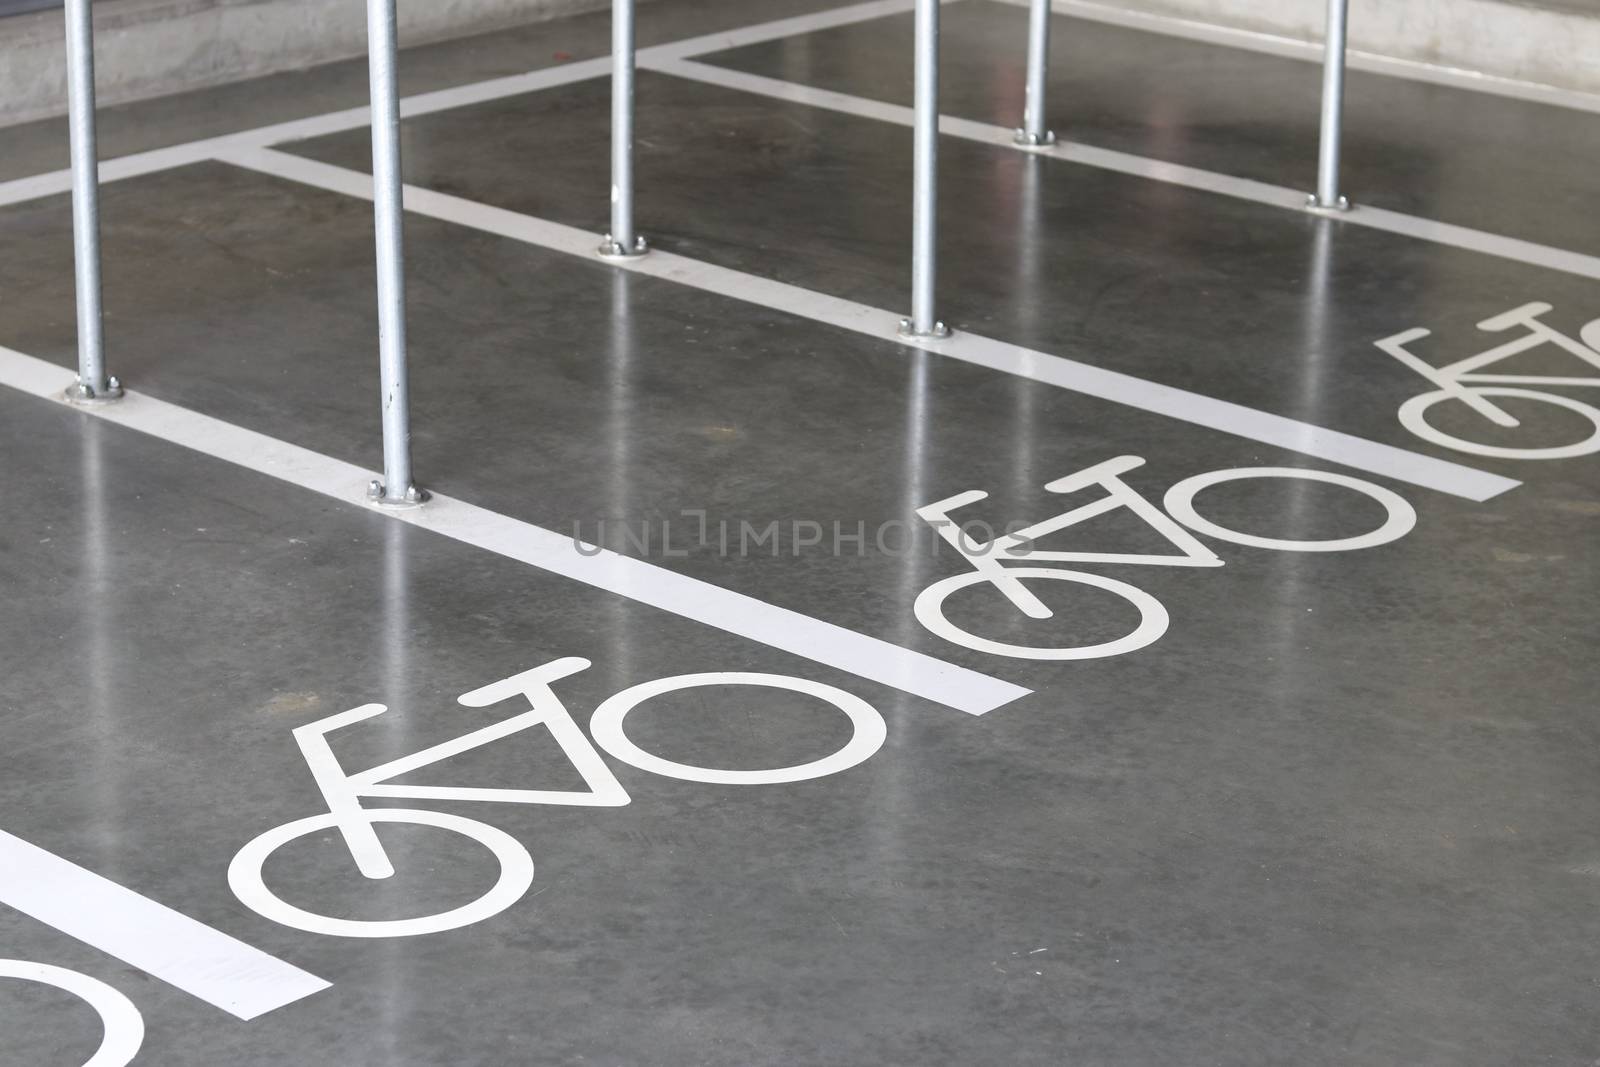 Symbol for bicycle parking. Parking for bicycles. Bicycle parking lot. by Eungsuwat